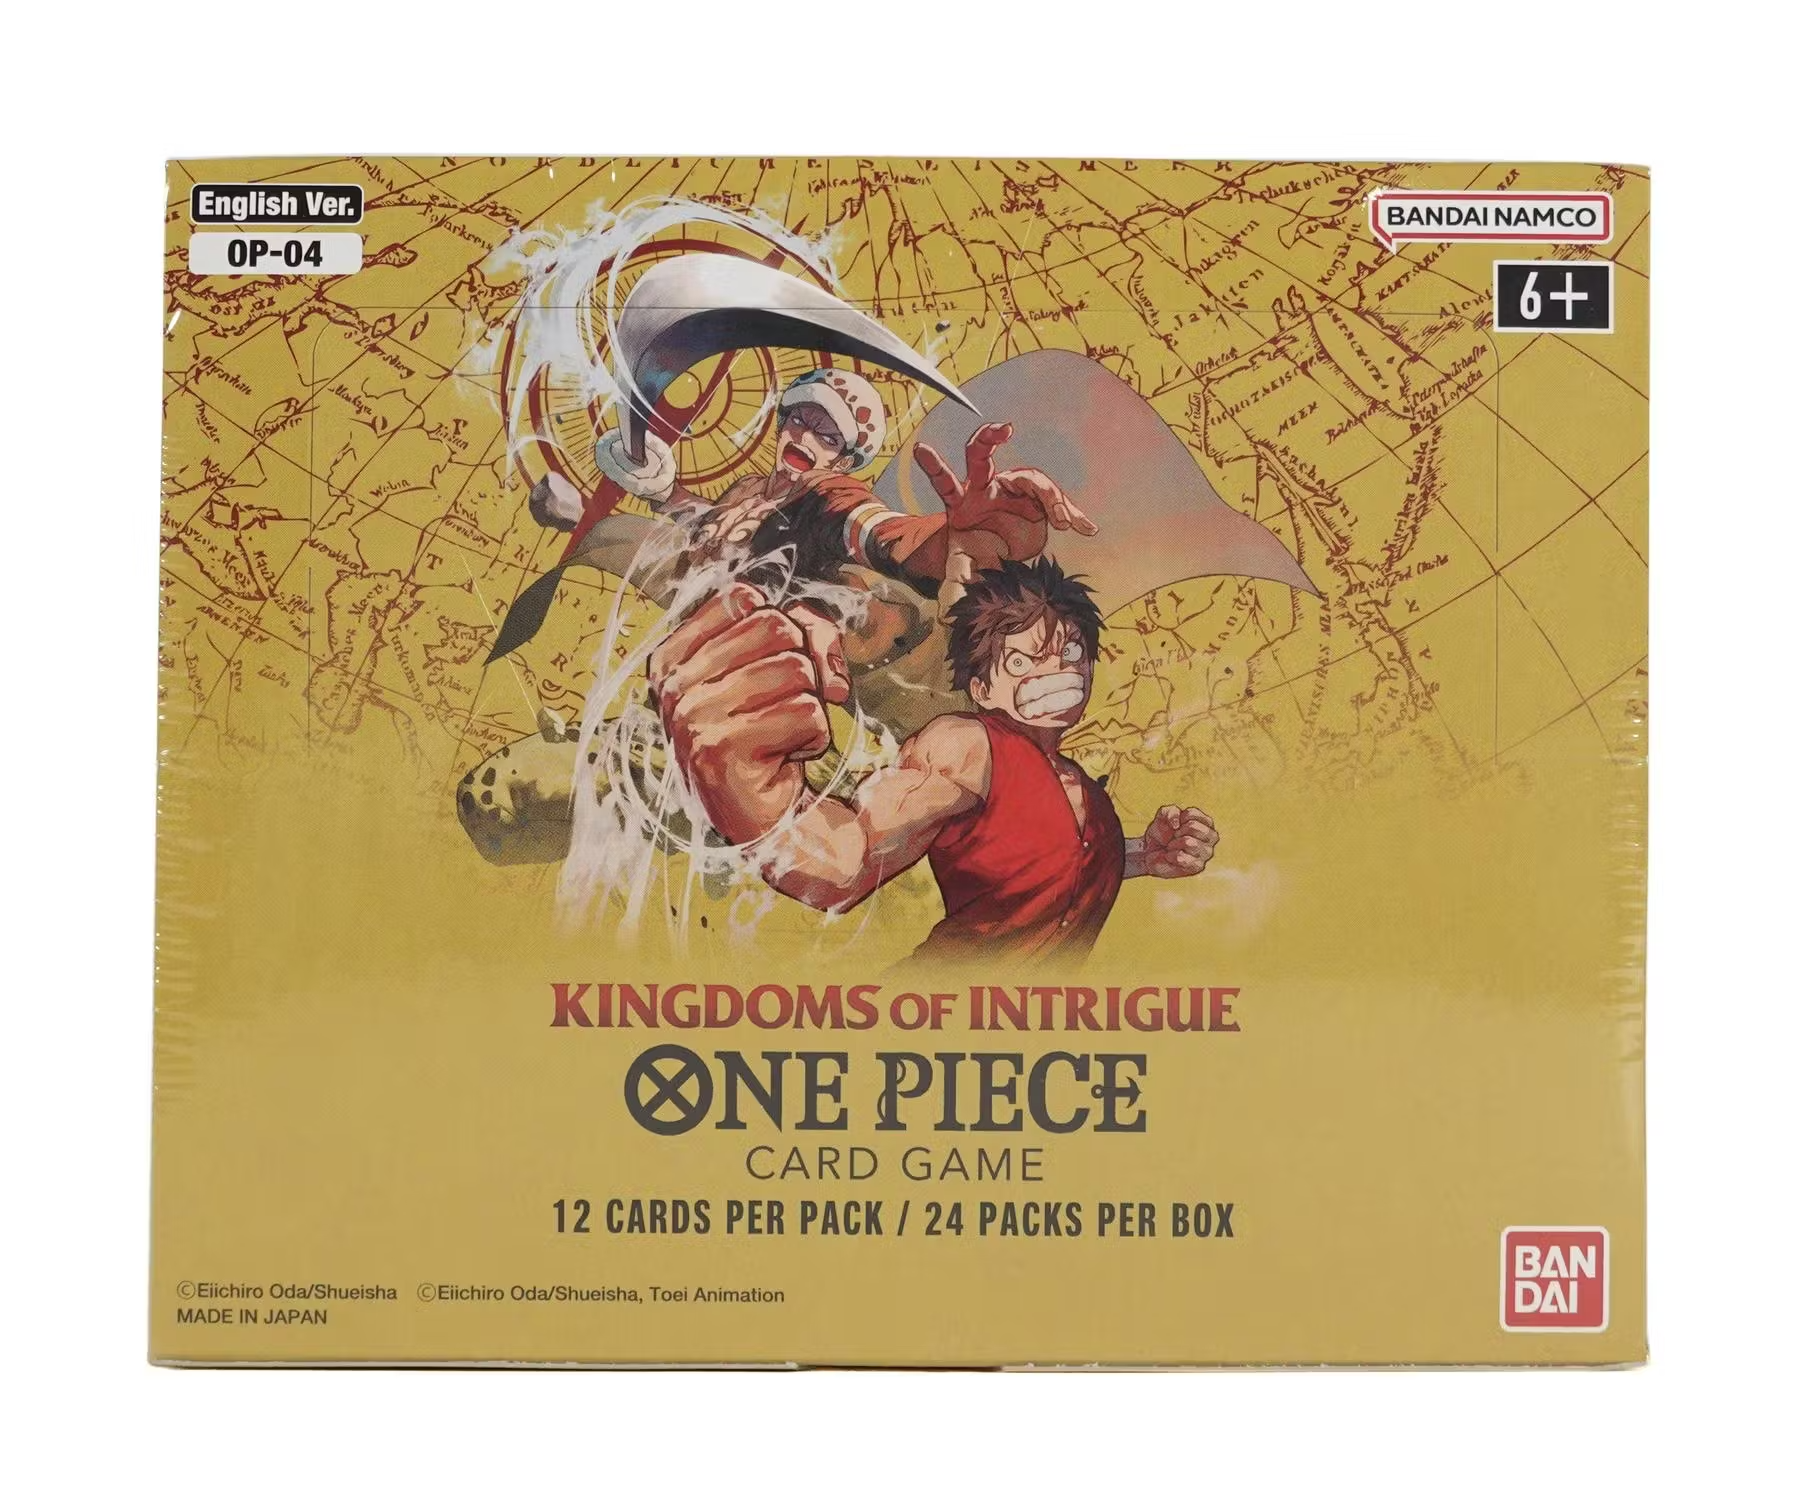 One Piece TCG Kingdoms of Intrigue Booster Box